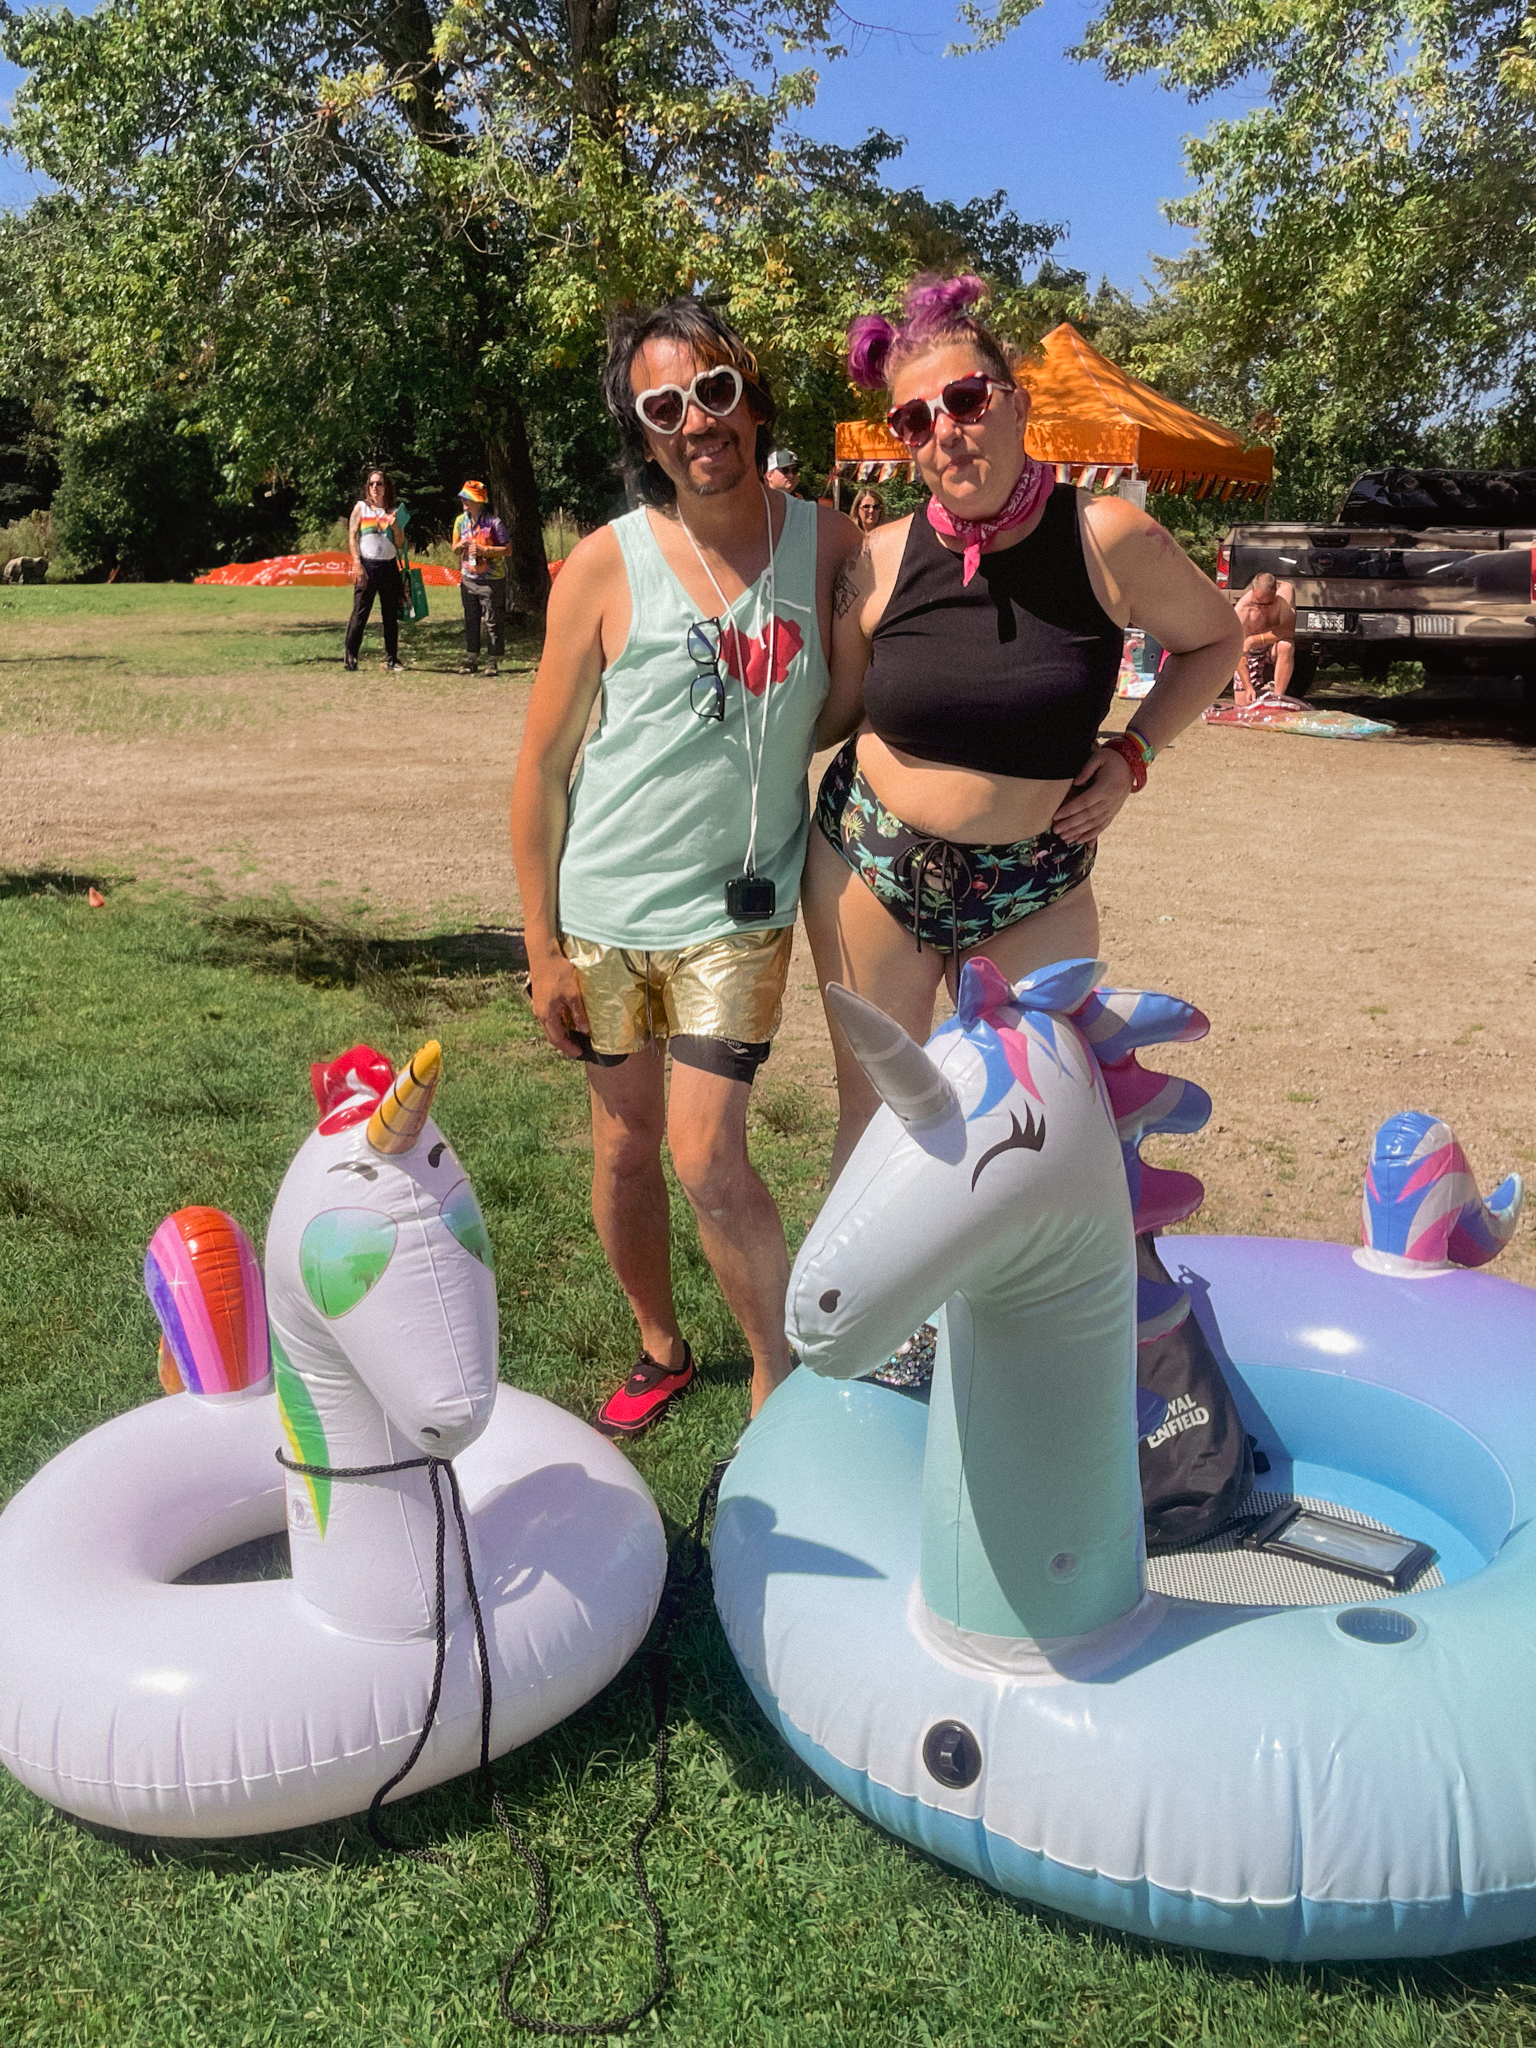 two smiling people with arms around each other's shoulders, wearing sunglasses and bathing suits and standing next to two large inflatable unicorn floaties. They are surrounded by green trees and grass under a bright blue sky. 